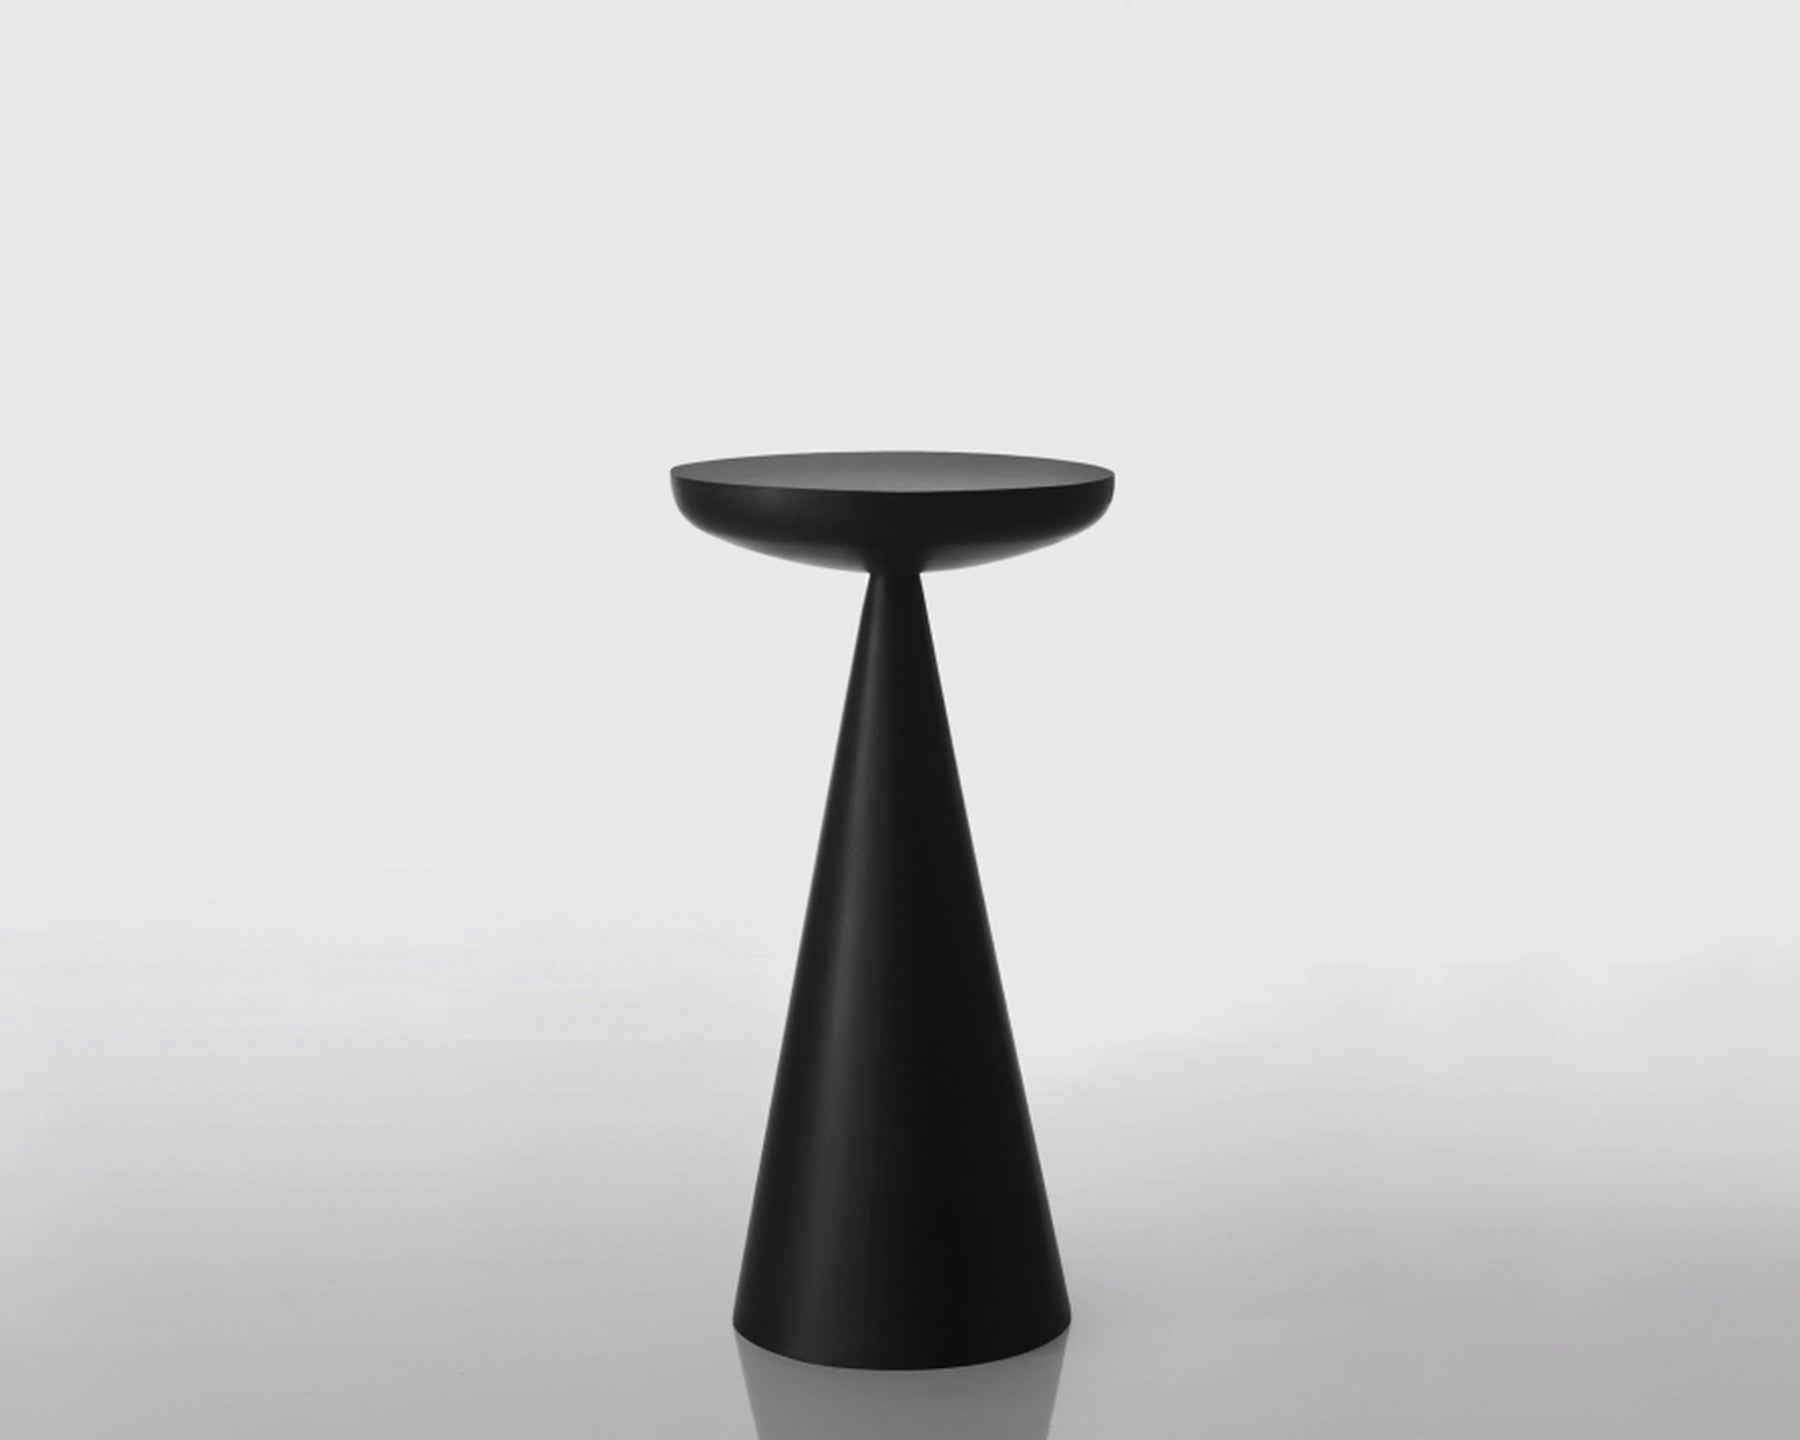 Small Black Table | DSHOP